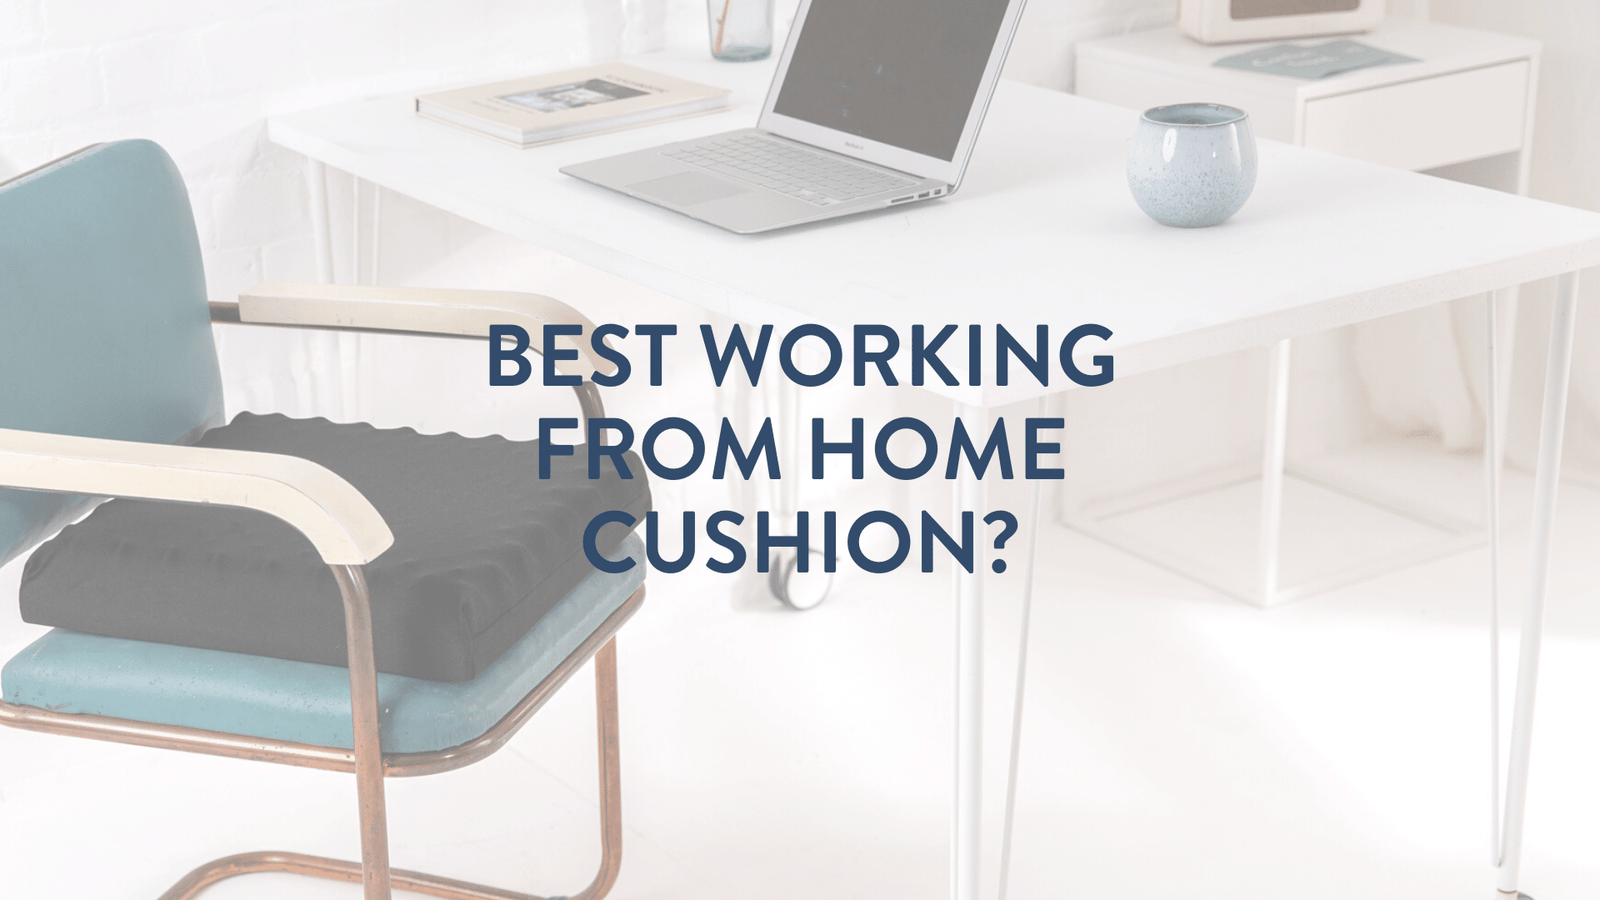 best cushion to use when working from home UK Putnams too soft and too hard / firm